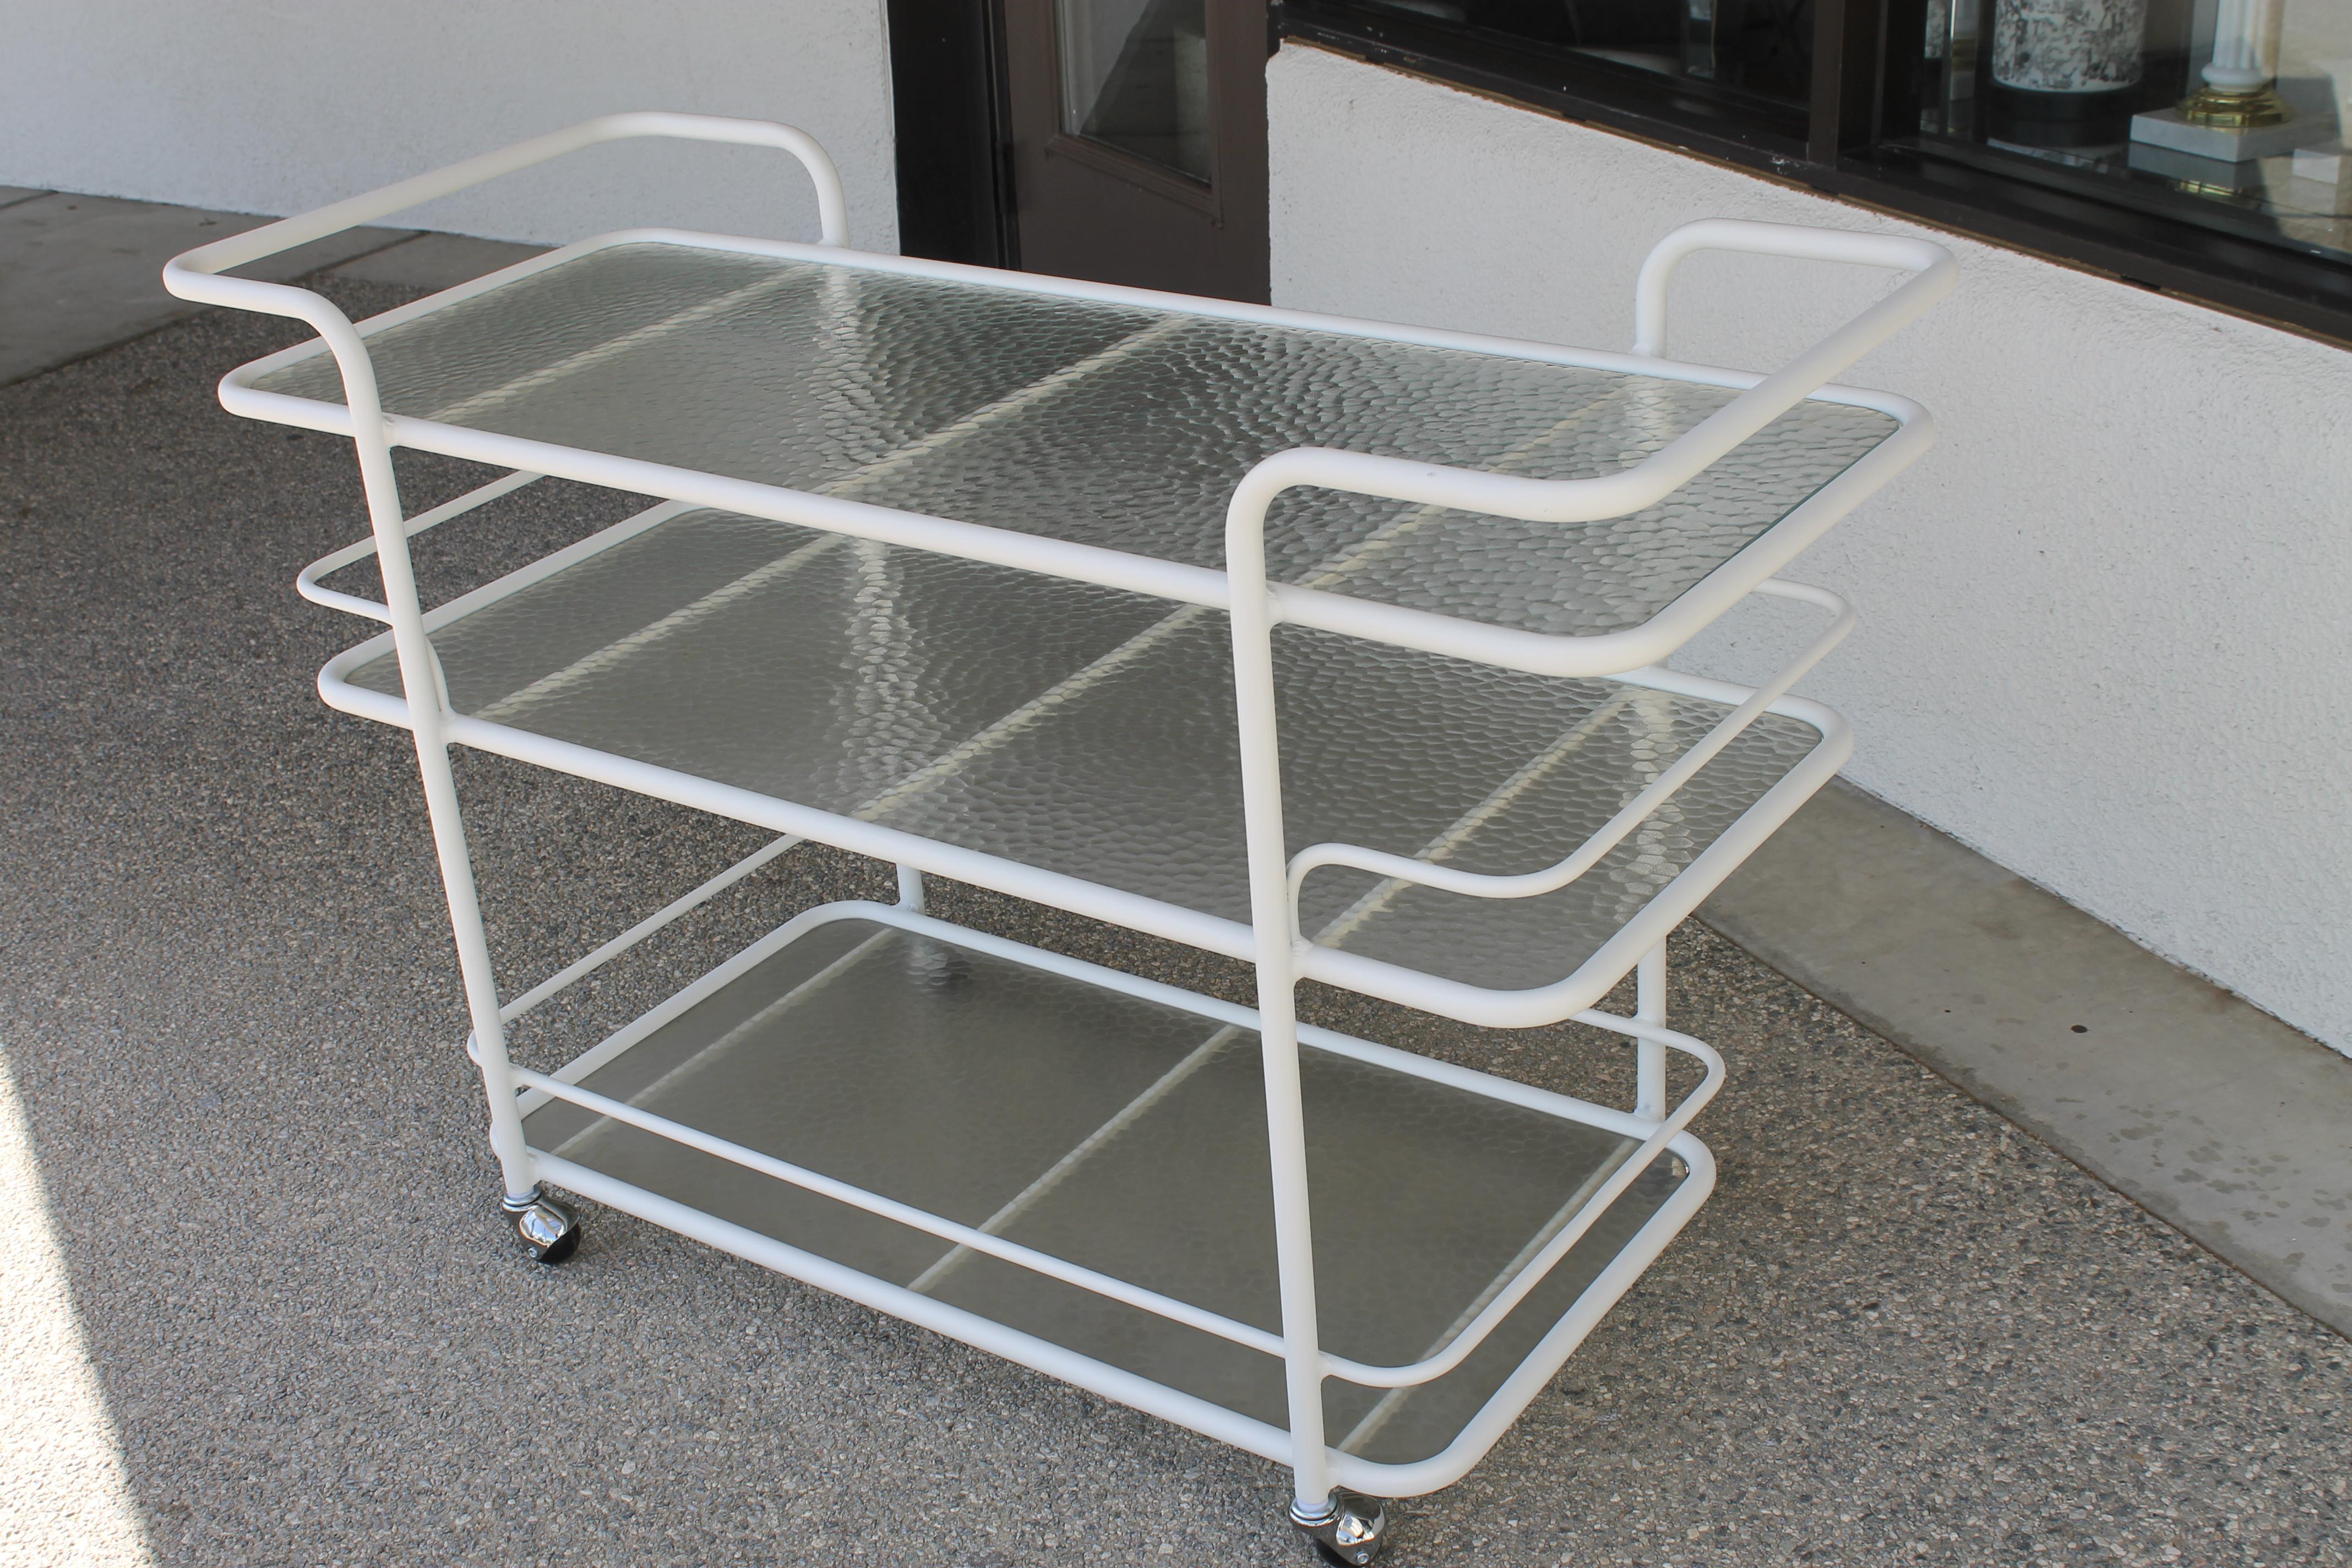 Three-tier aluminum bar cart designed by Richard Frinier for Brown Jordan. Reminiscent of Walter Lamb designs. Contains original glass. We replaced steel rollers. This bar cart has been sand blasted and powder-coated a white satin. Cart measures: